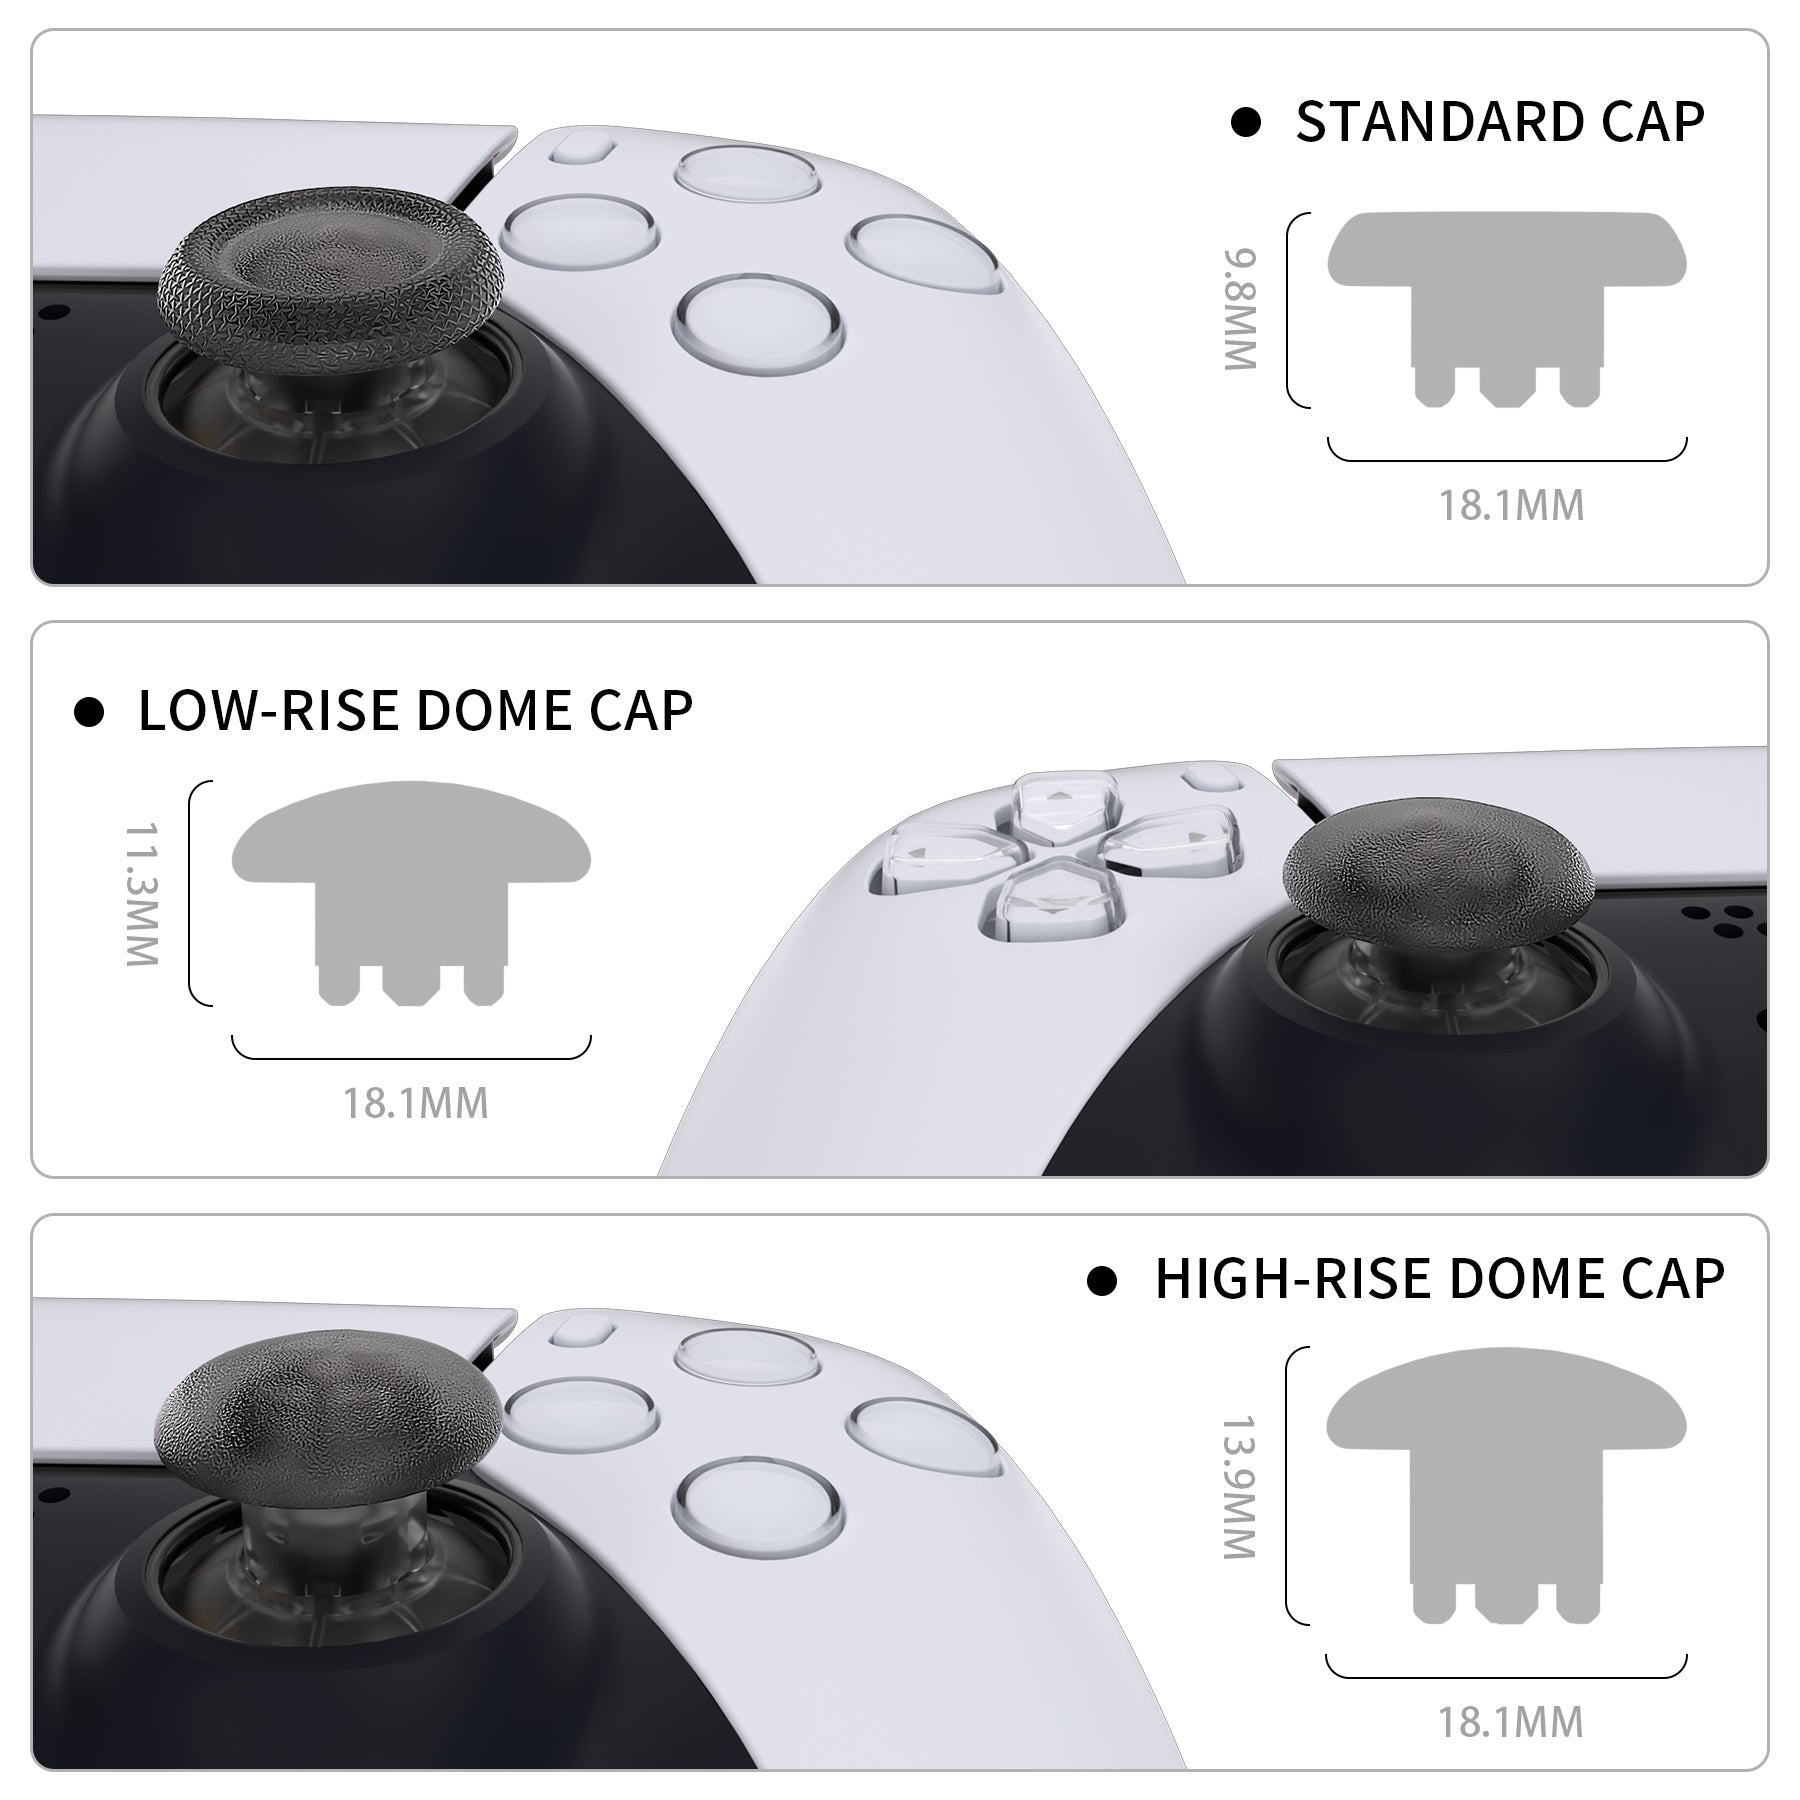 EDGE Sticks Replacement Interchangeable Thumbsticks for PS5 & PS4 All Model Controllers - Clear Black eXtremeRate